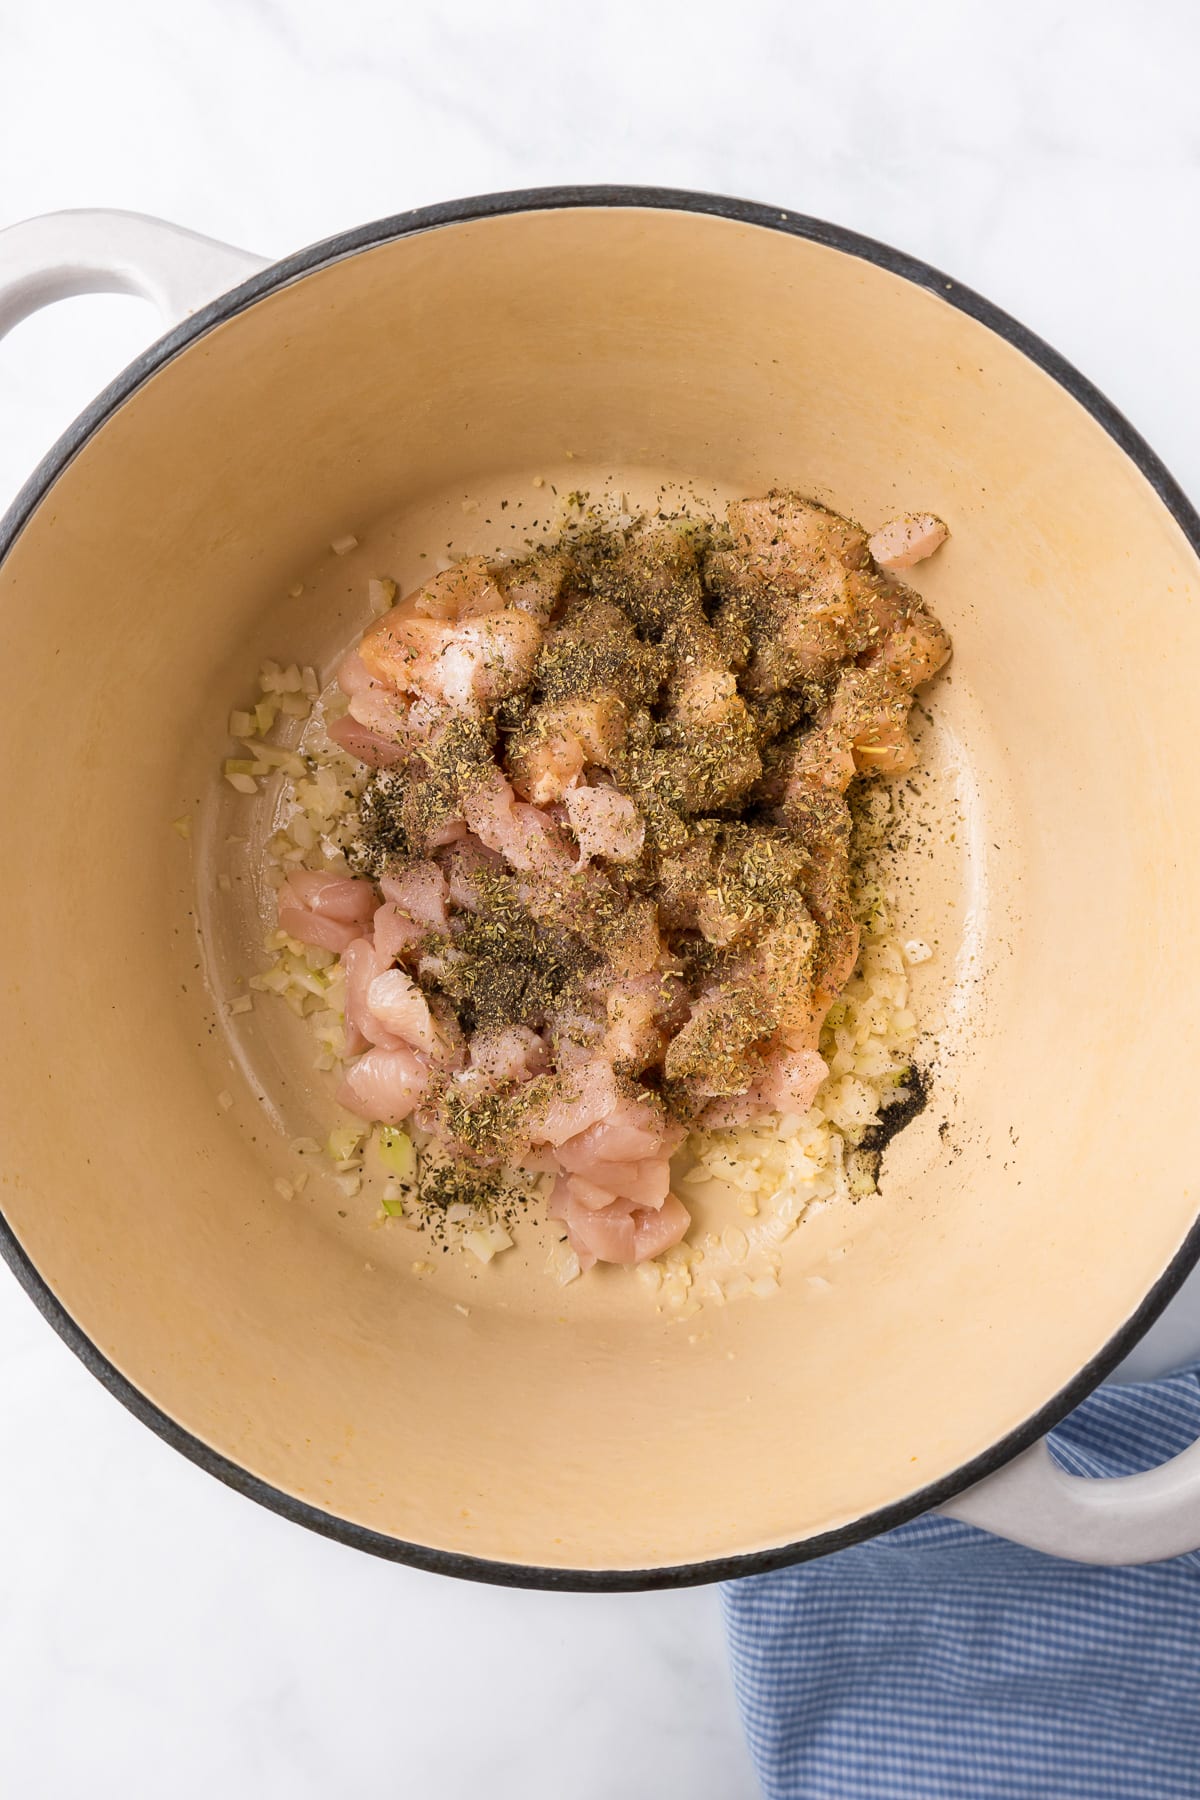 Raw chicken pieces covered in seasoning in a pot being cooked.